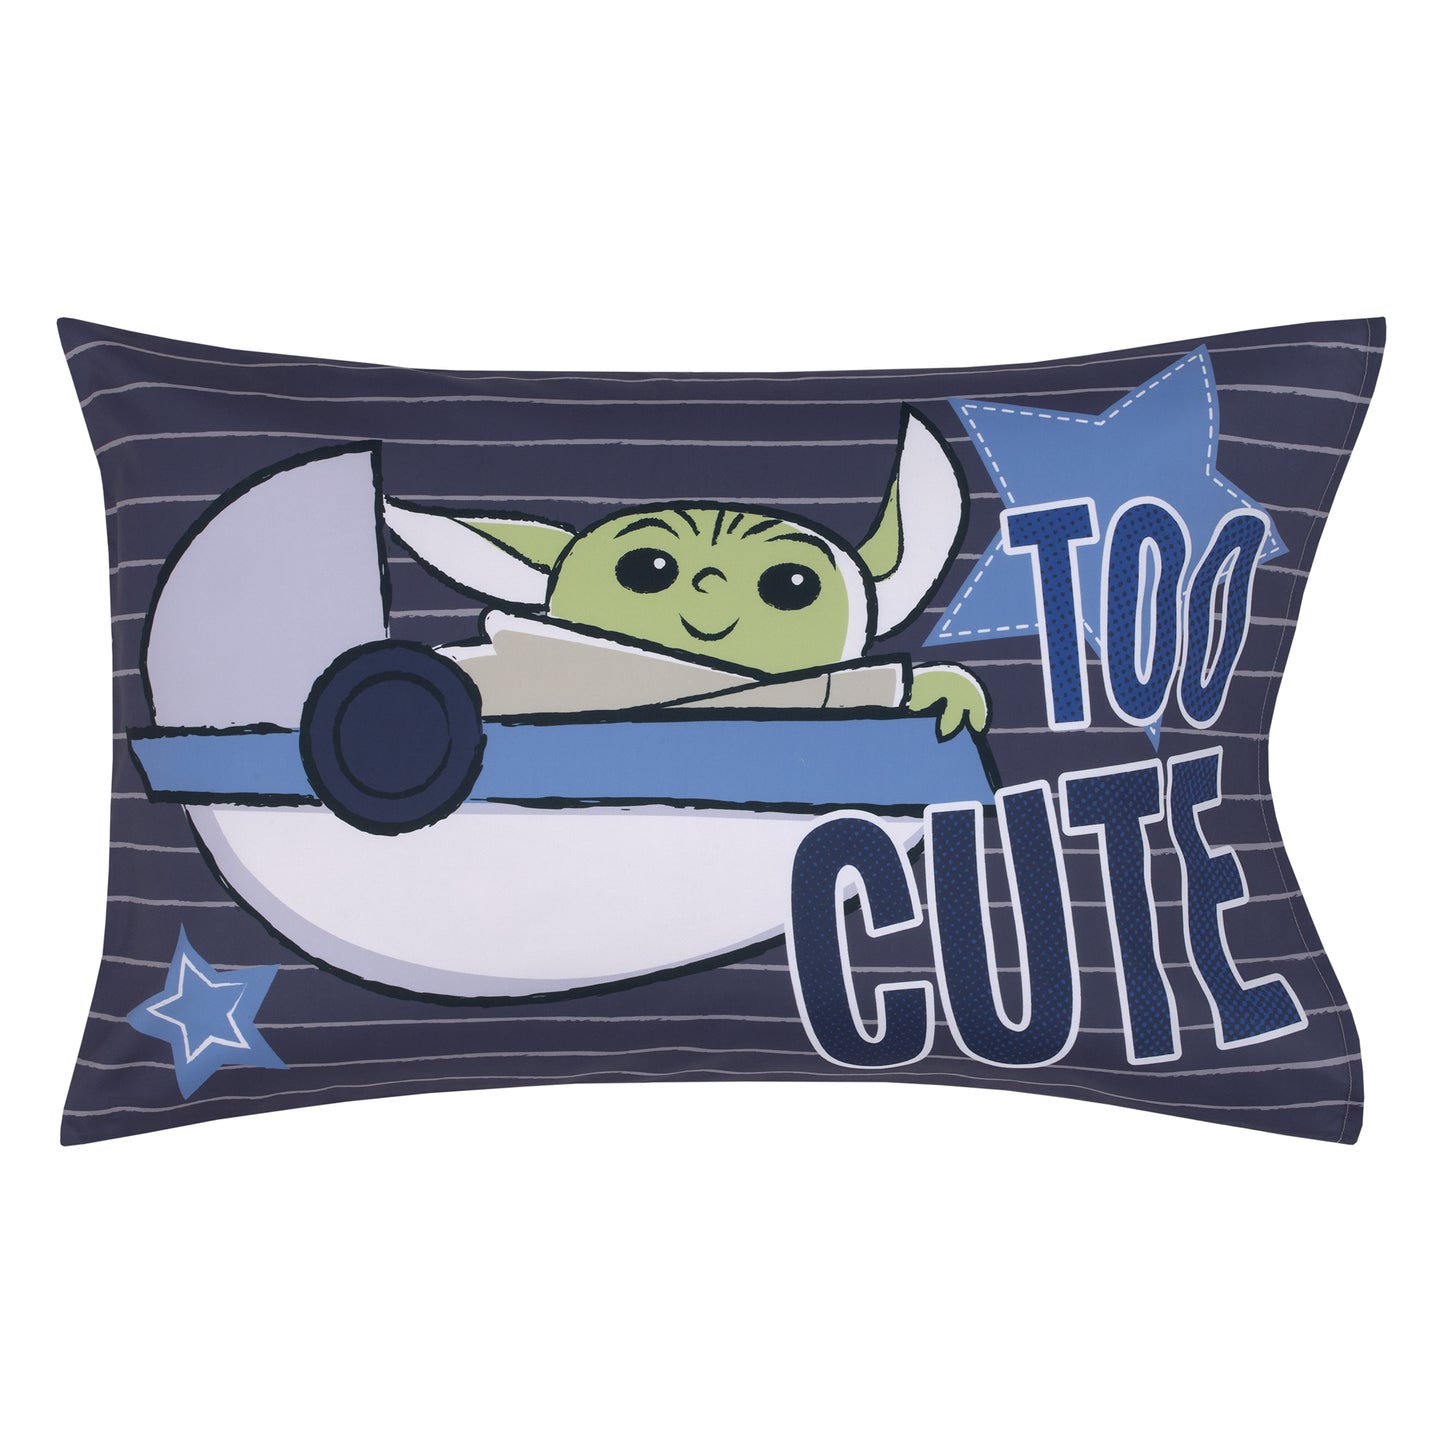 Star Wars The Child Cutest in the Galaxy Blue, Green and Gray, "Too Cute" Grogu, Stars, Hover Pod, and Sorgan Frog 4 Piece Toddler Bed Set - Comforter, Fitted Bottom Sheet, Flat Top Sheet, and Reversible Pillowcase